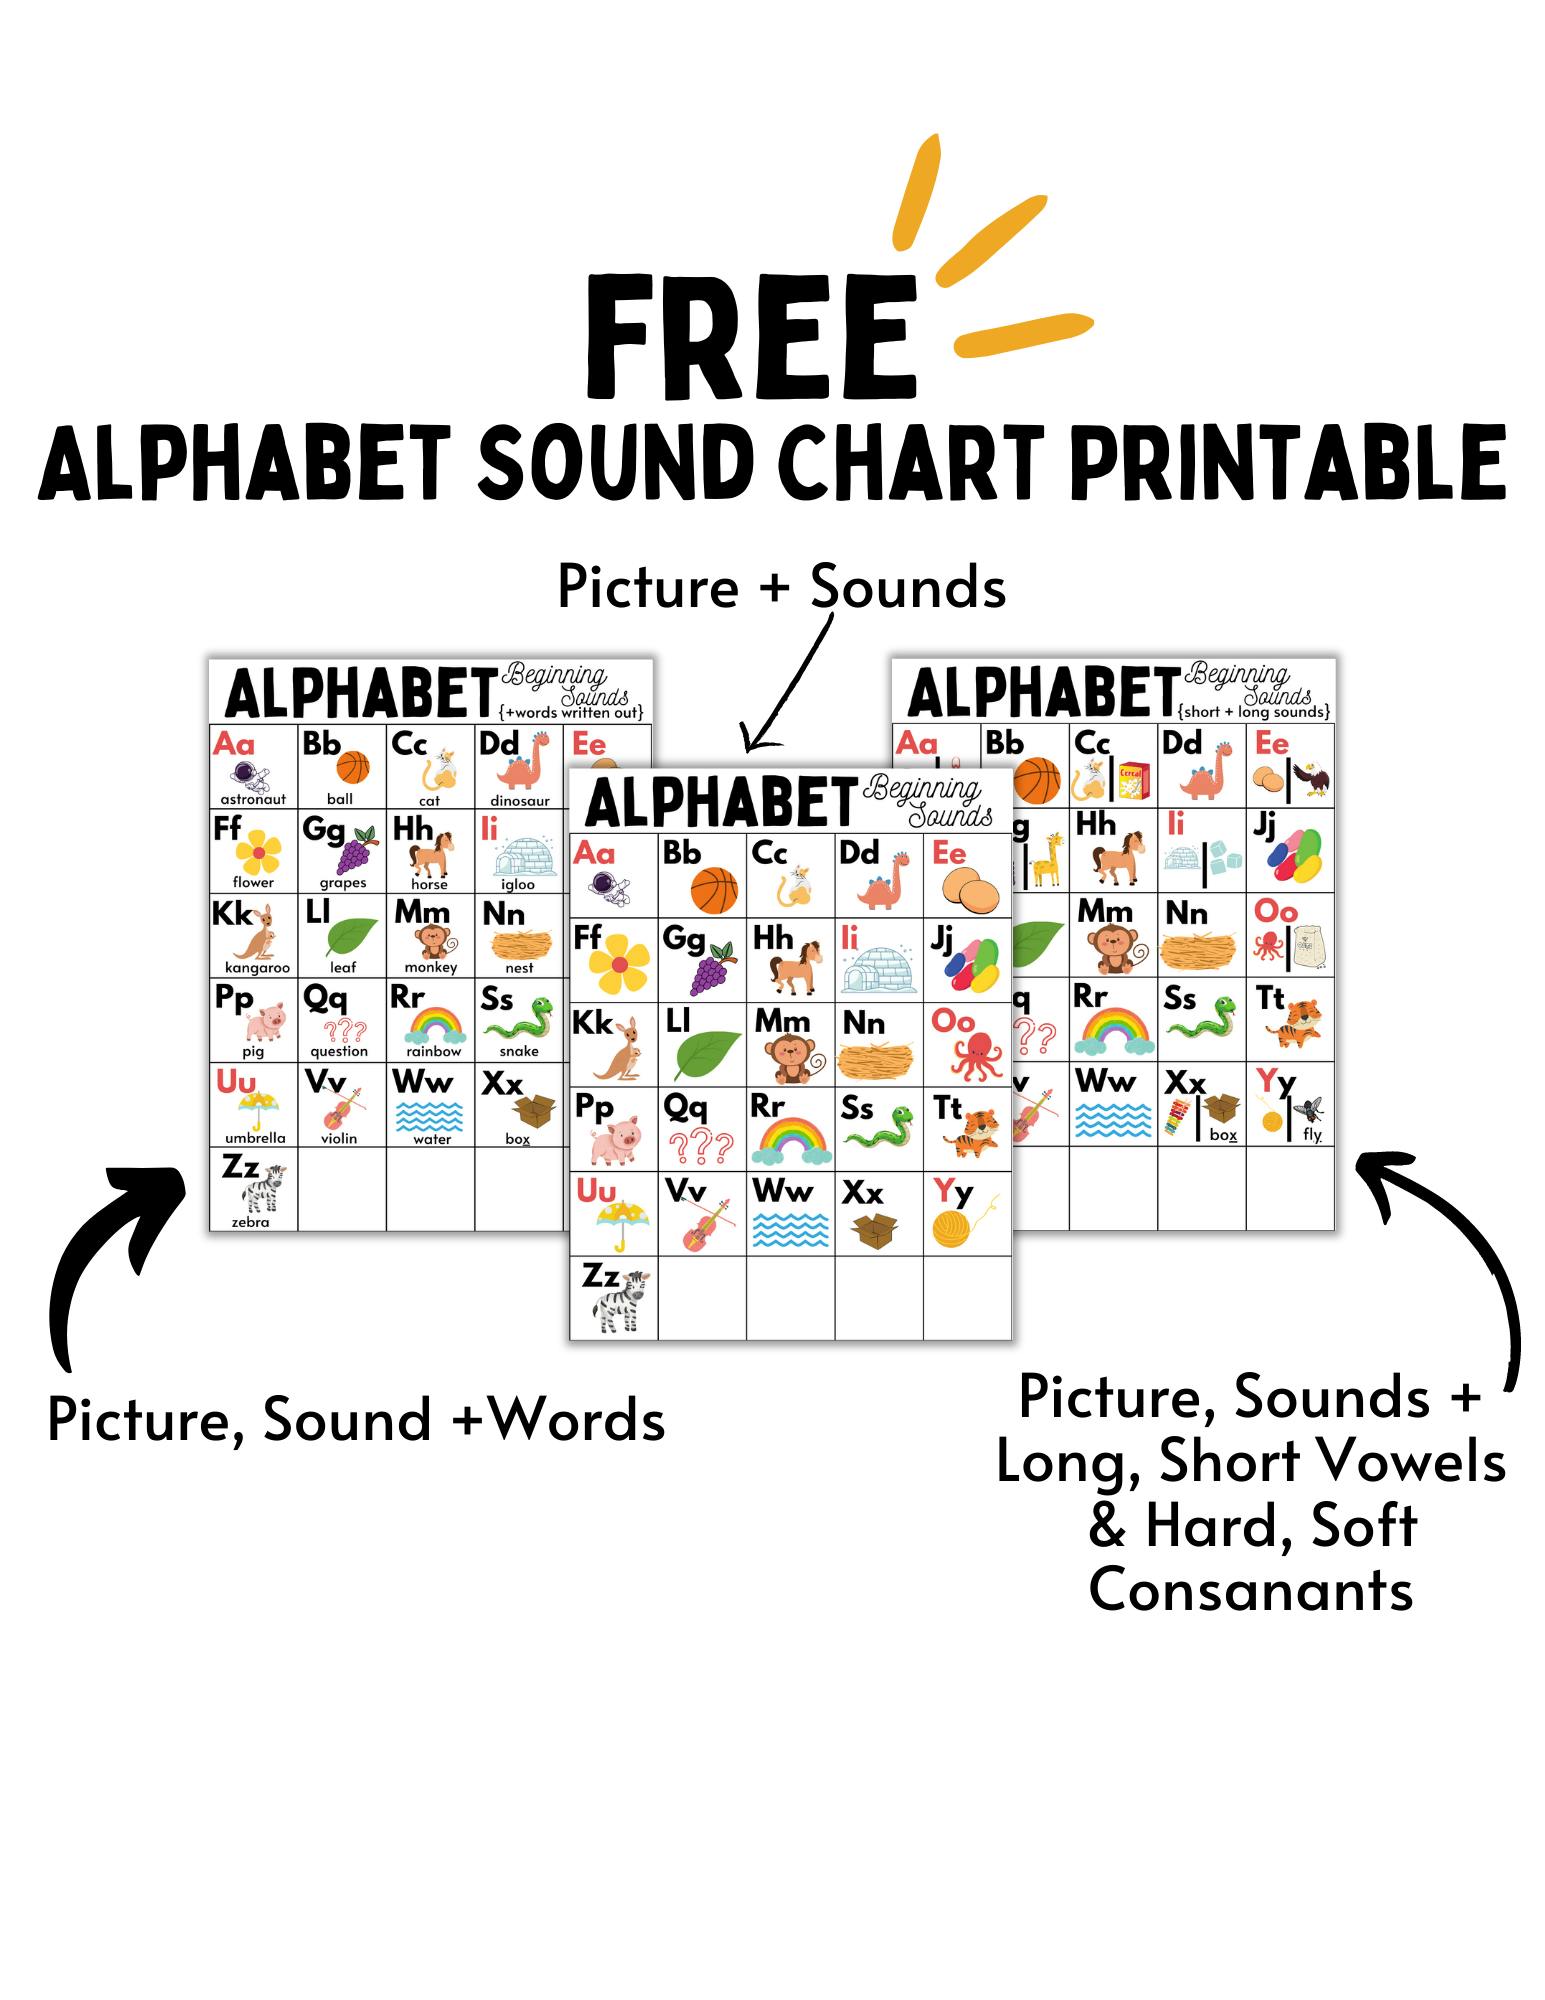 FREE Printable Alphabet Sound Chart (plus easy at home ABC activities)